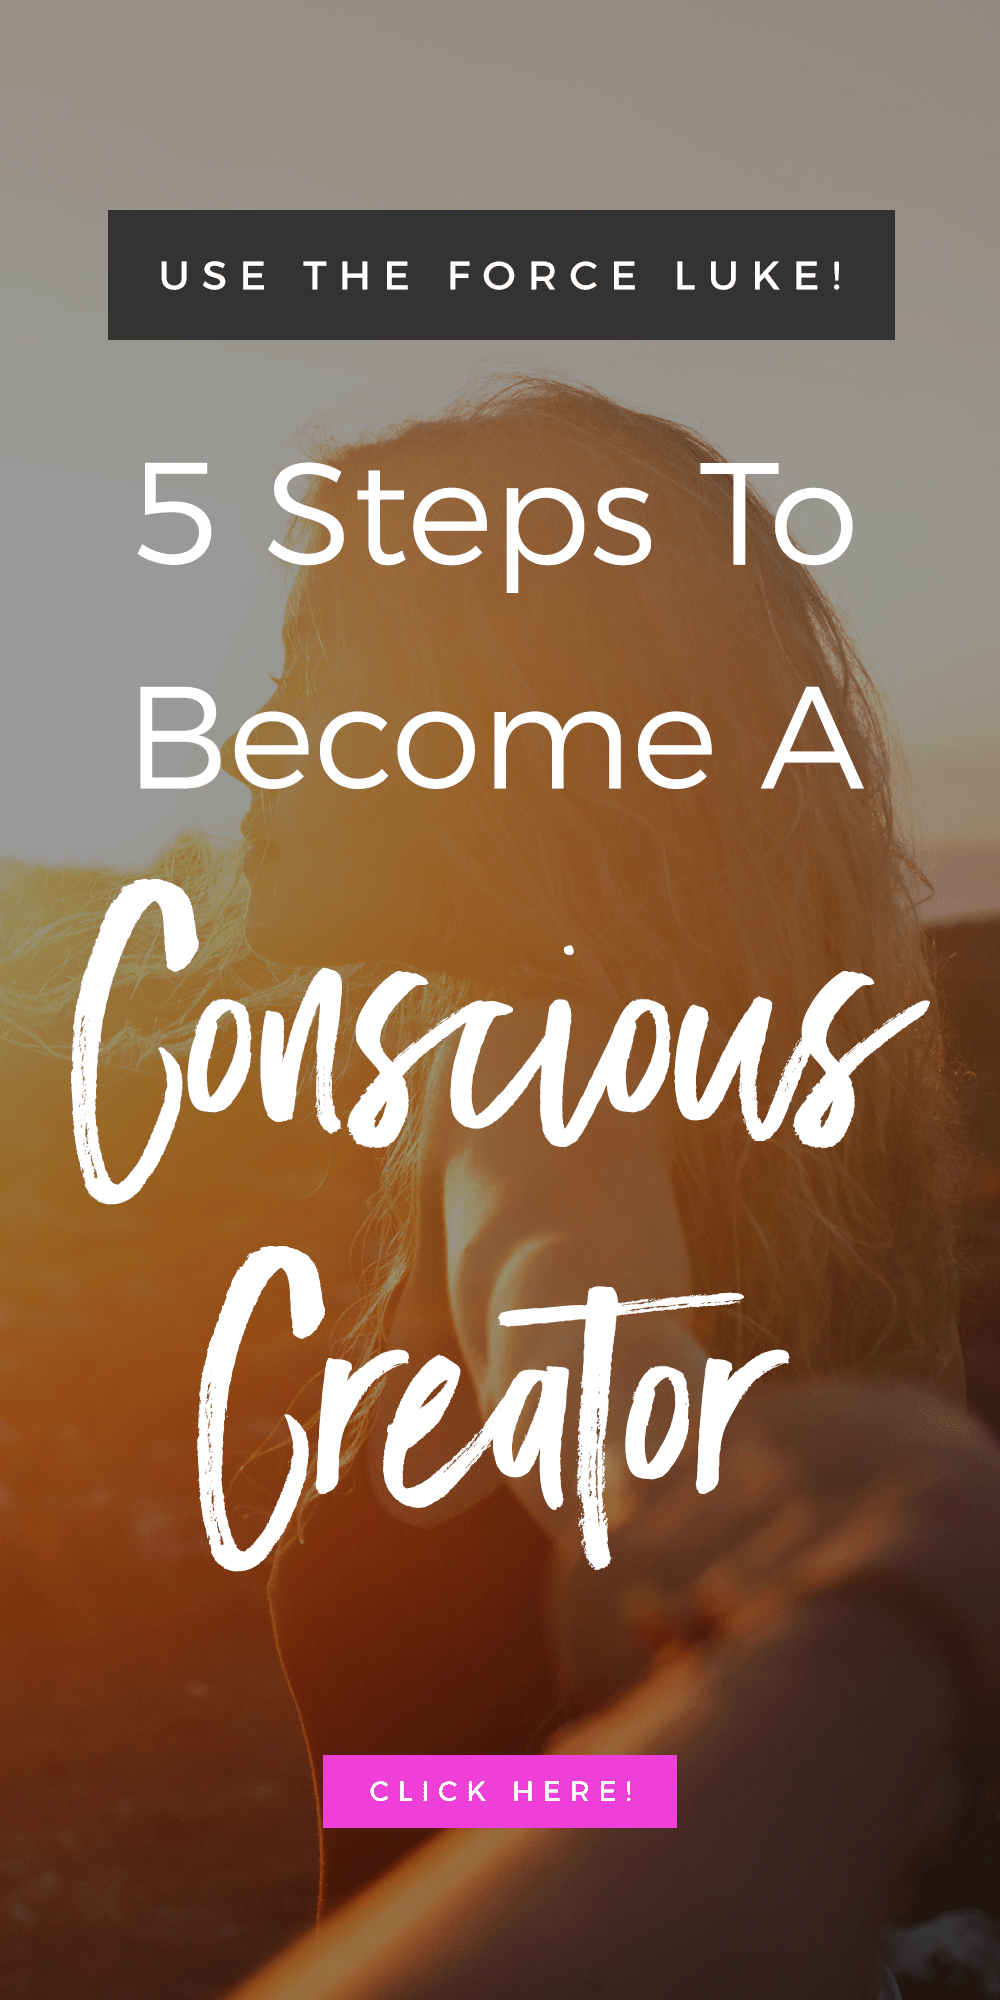 Use The Force Luke! 5 Steps To Become A Conscious Creator